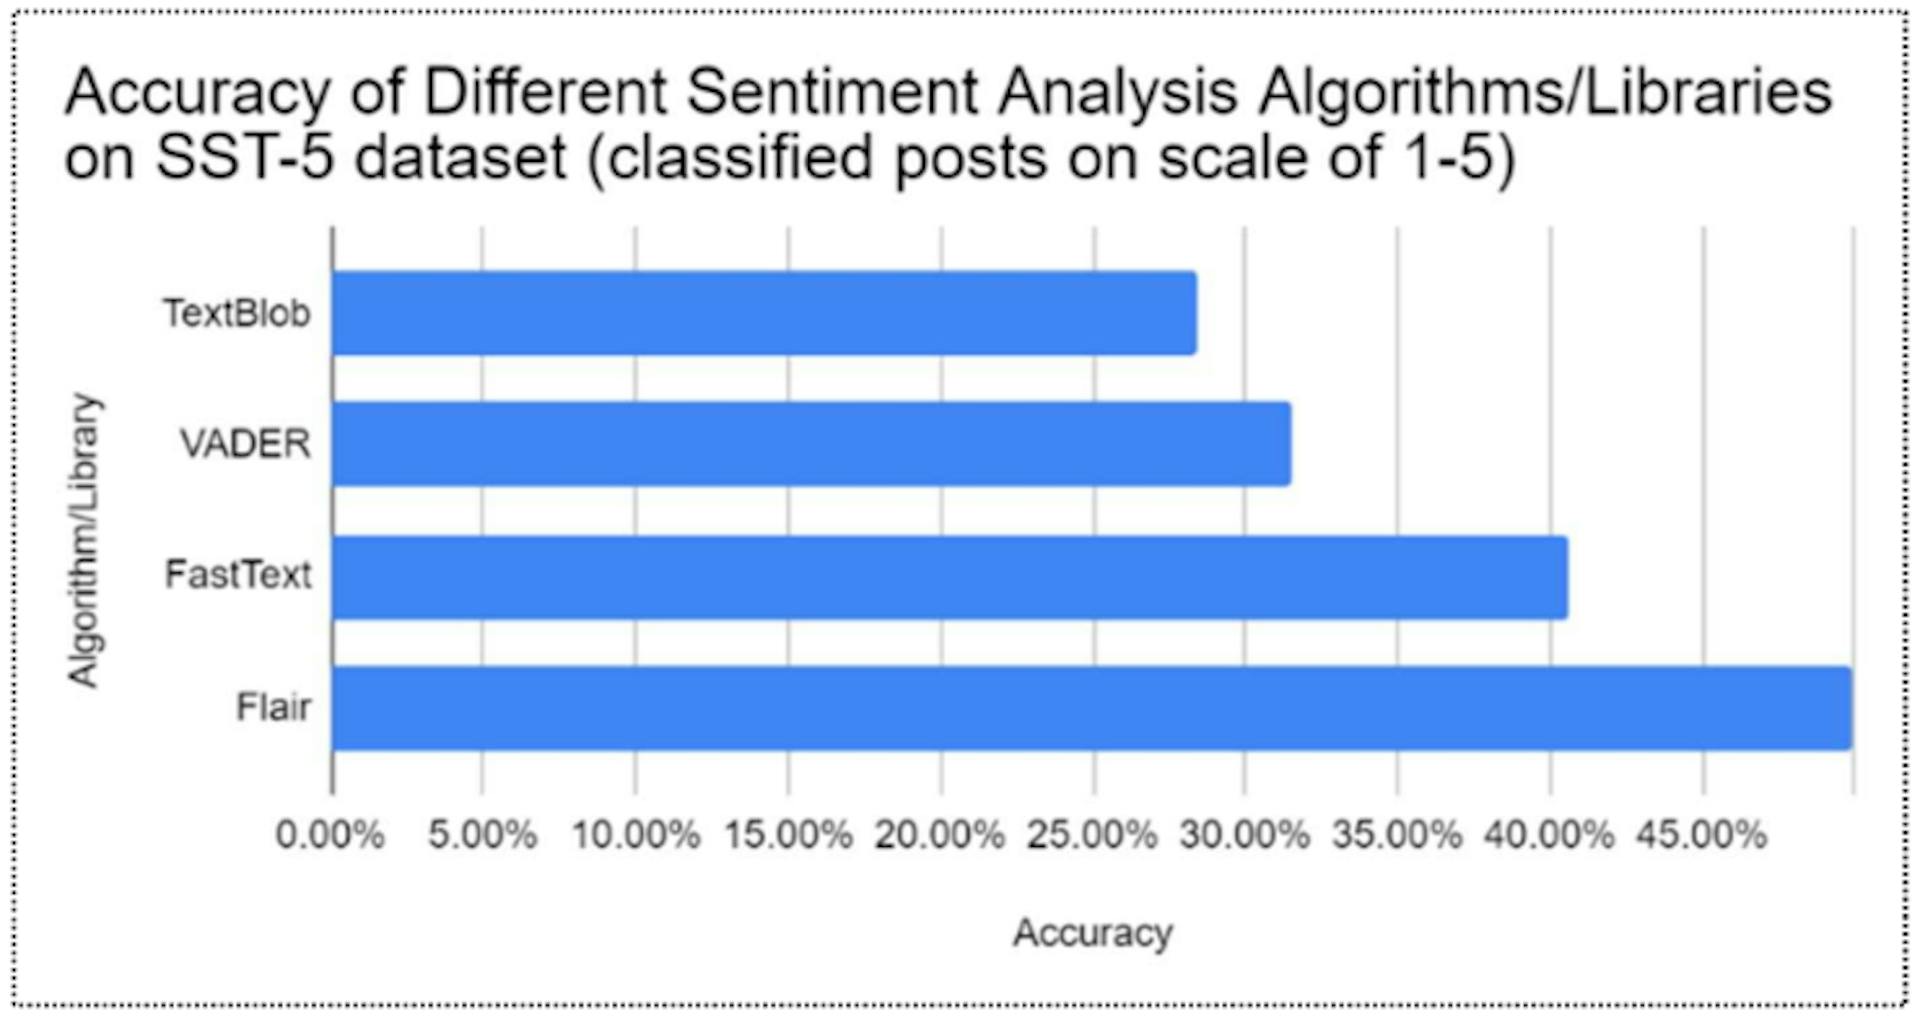 Figure 4: Comparison of accuracy of different sentiment analysis algorithms on SST-5 database